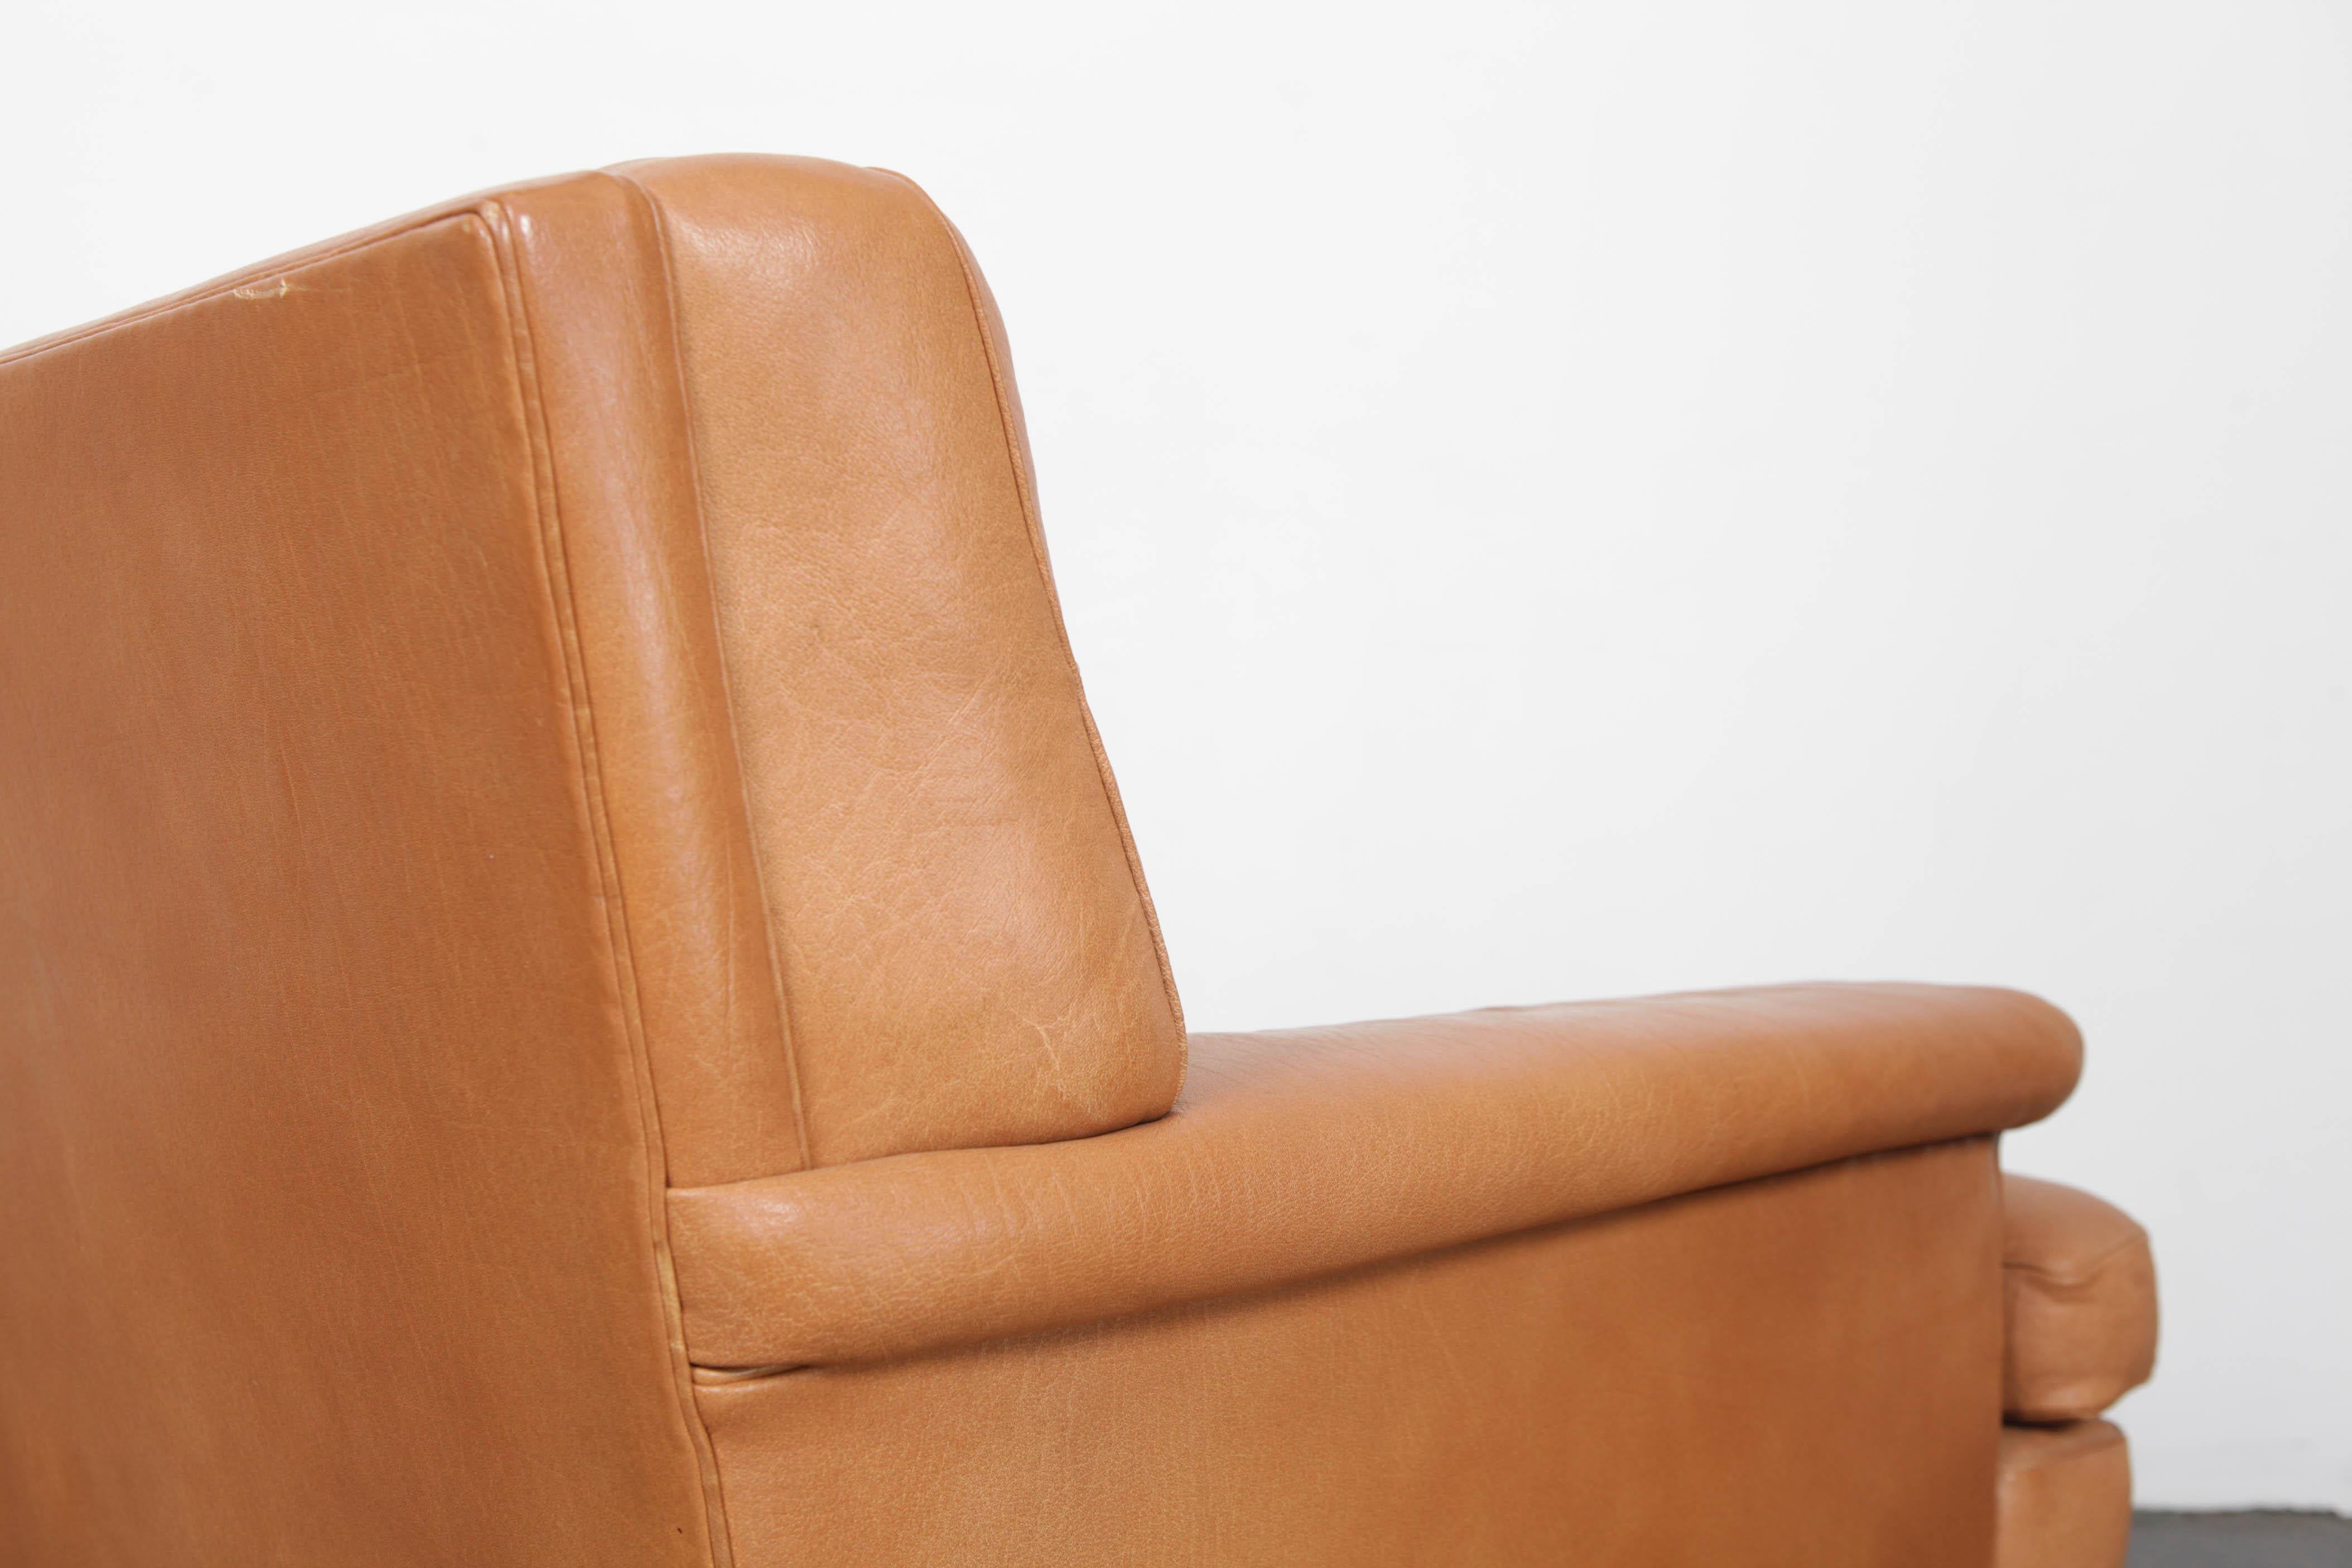 Arne Norell Merkur Tan Leather Tufted Lounge Chair, Sweden, Norell AB 8